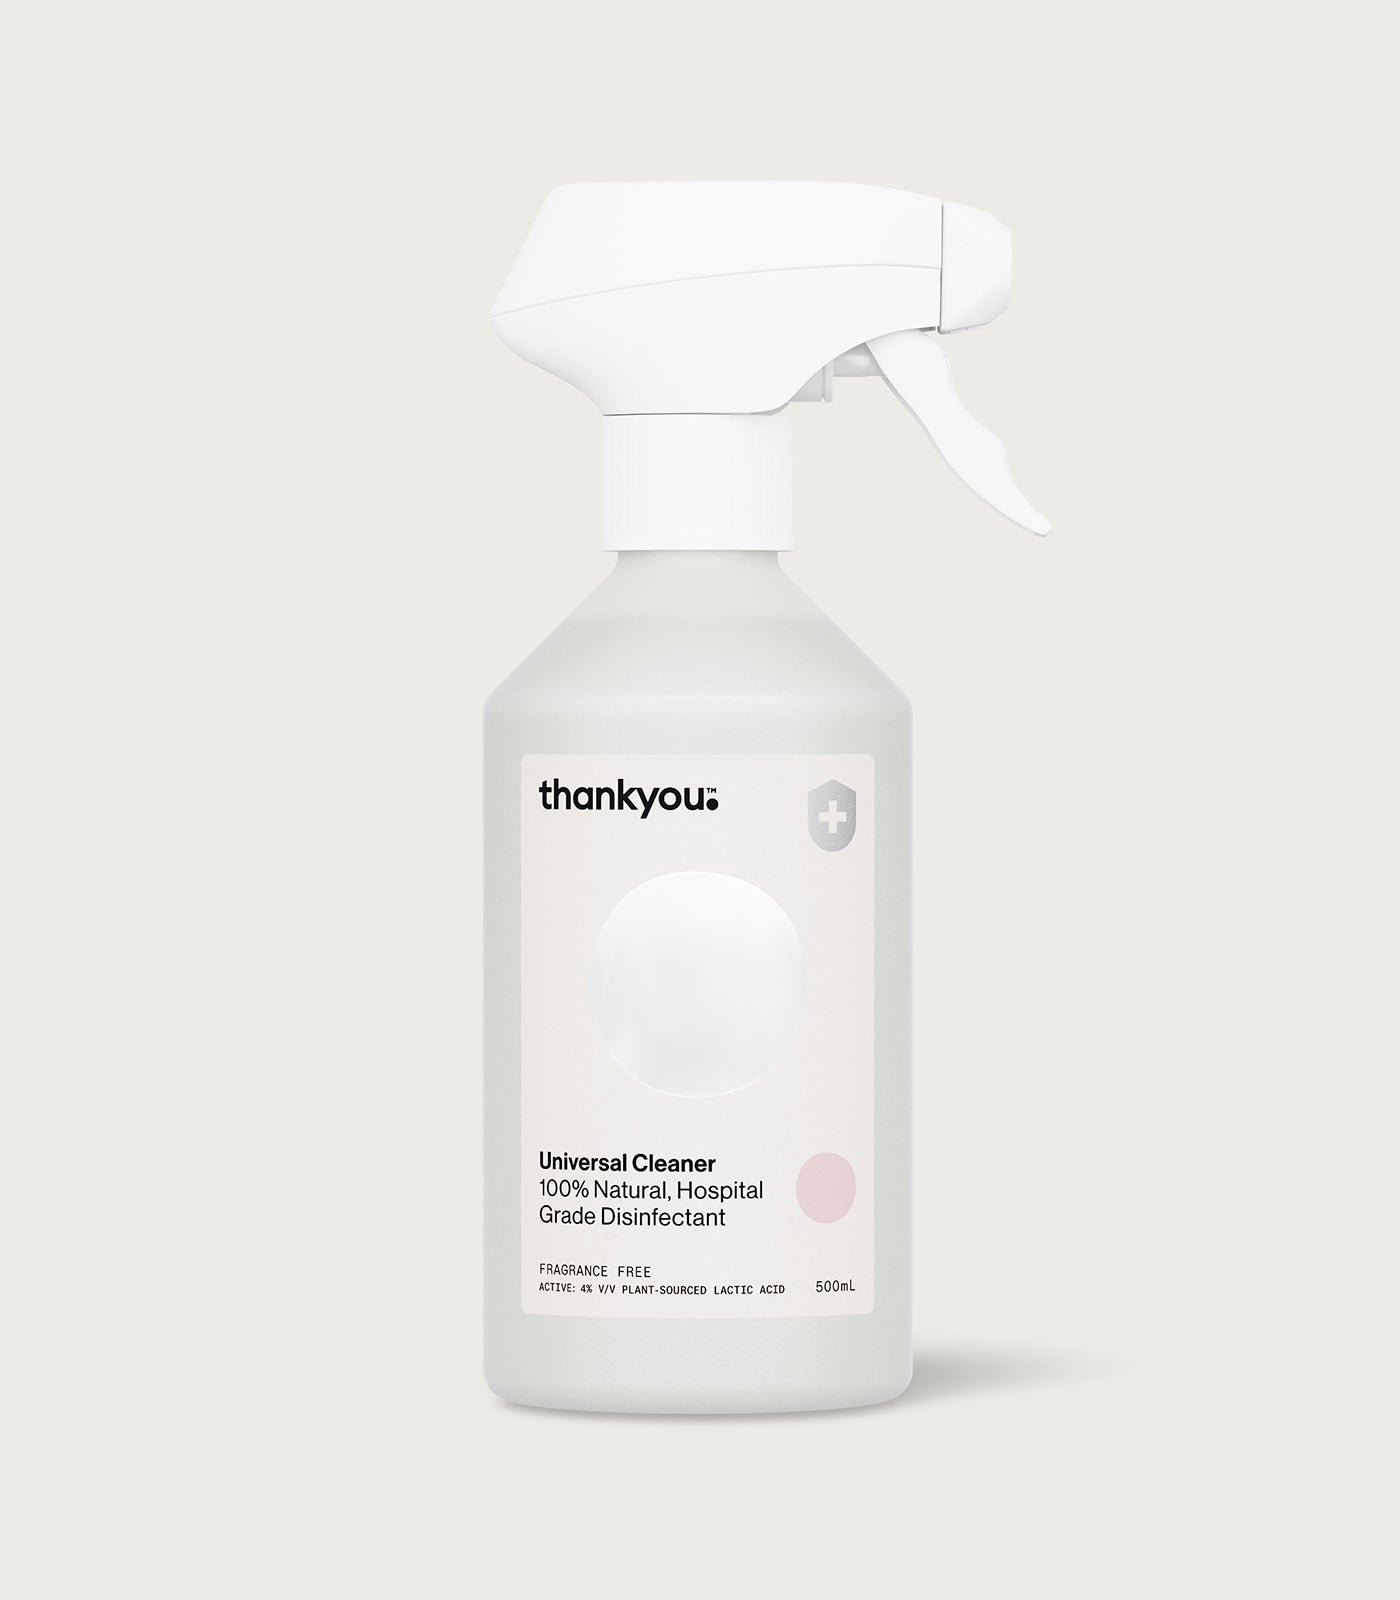 Universal Cleaner - Fragrance Free - 500mL - Front - Thankyou